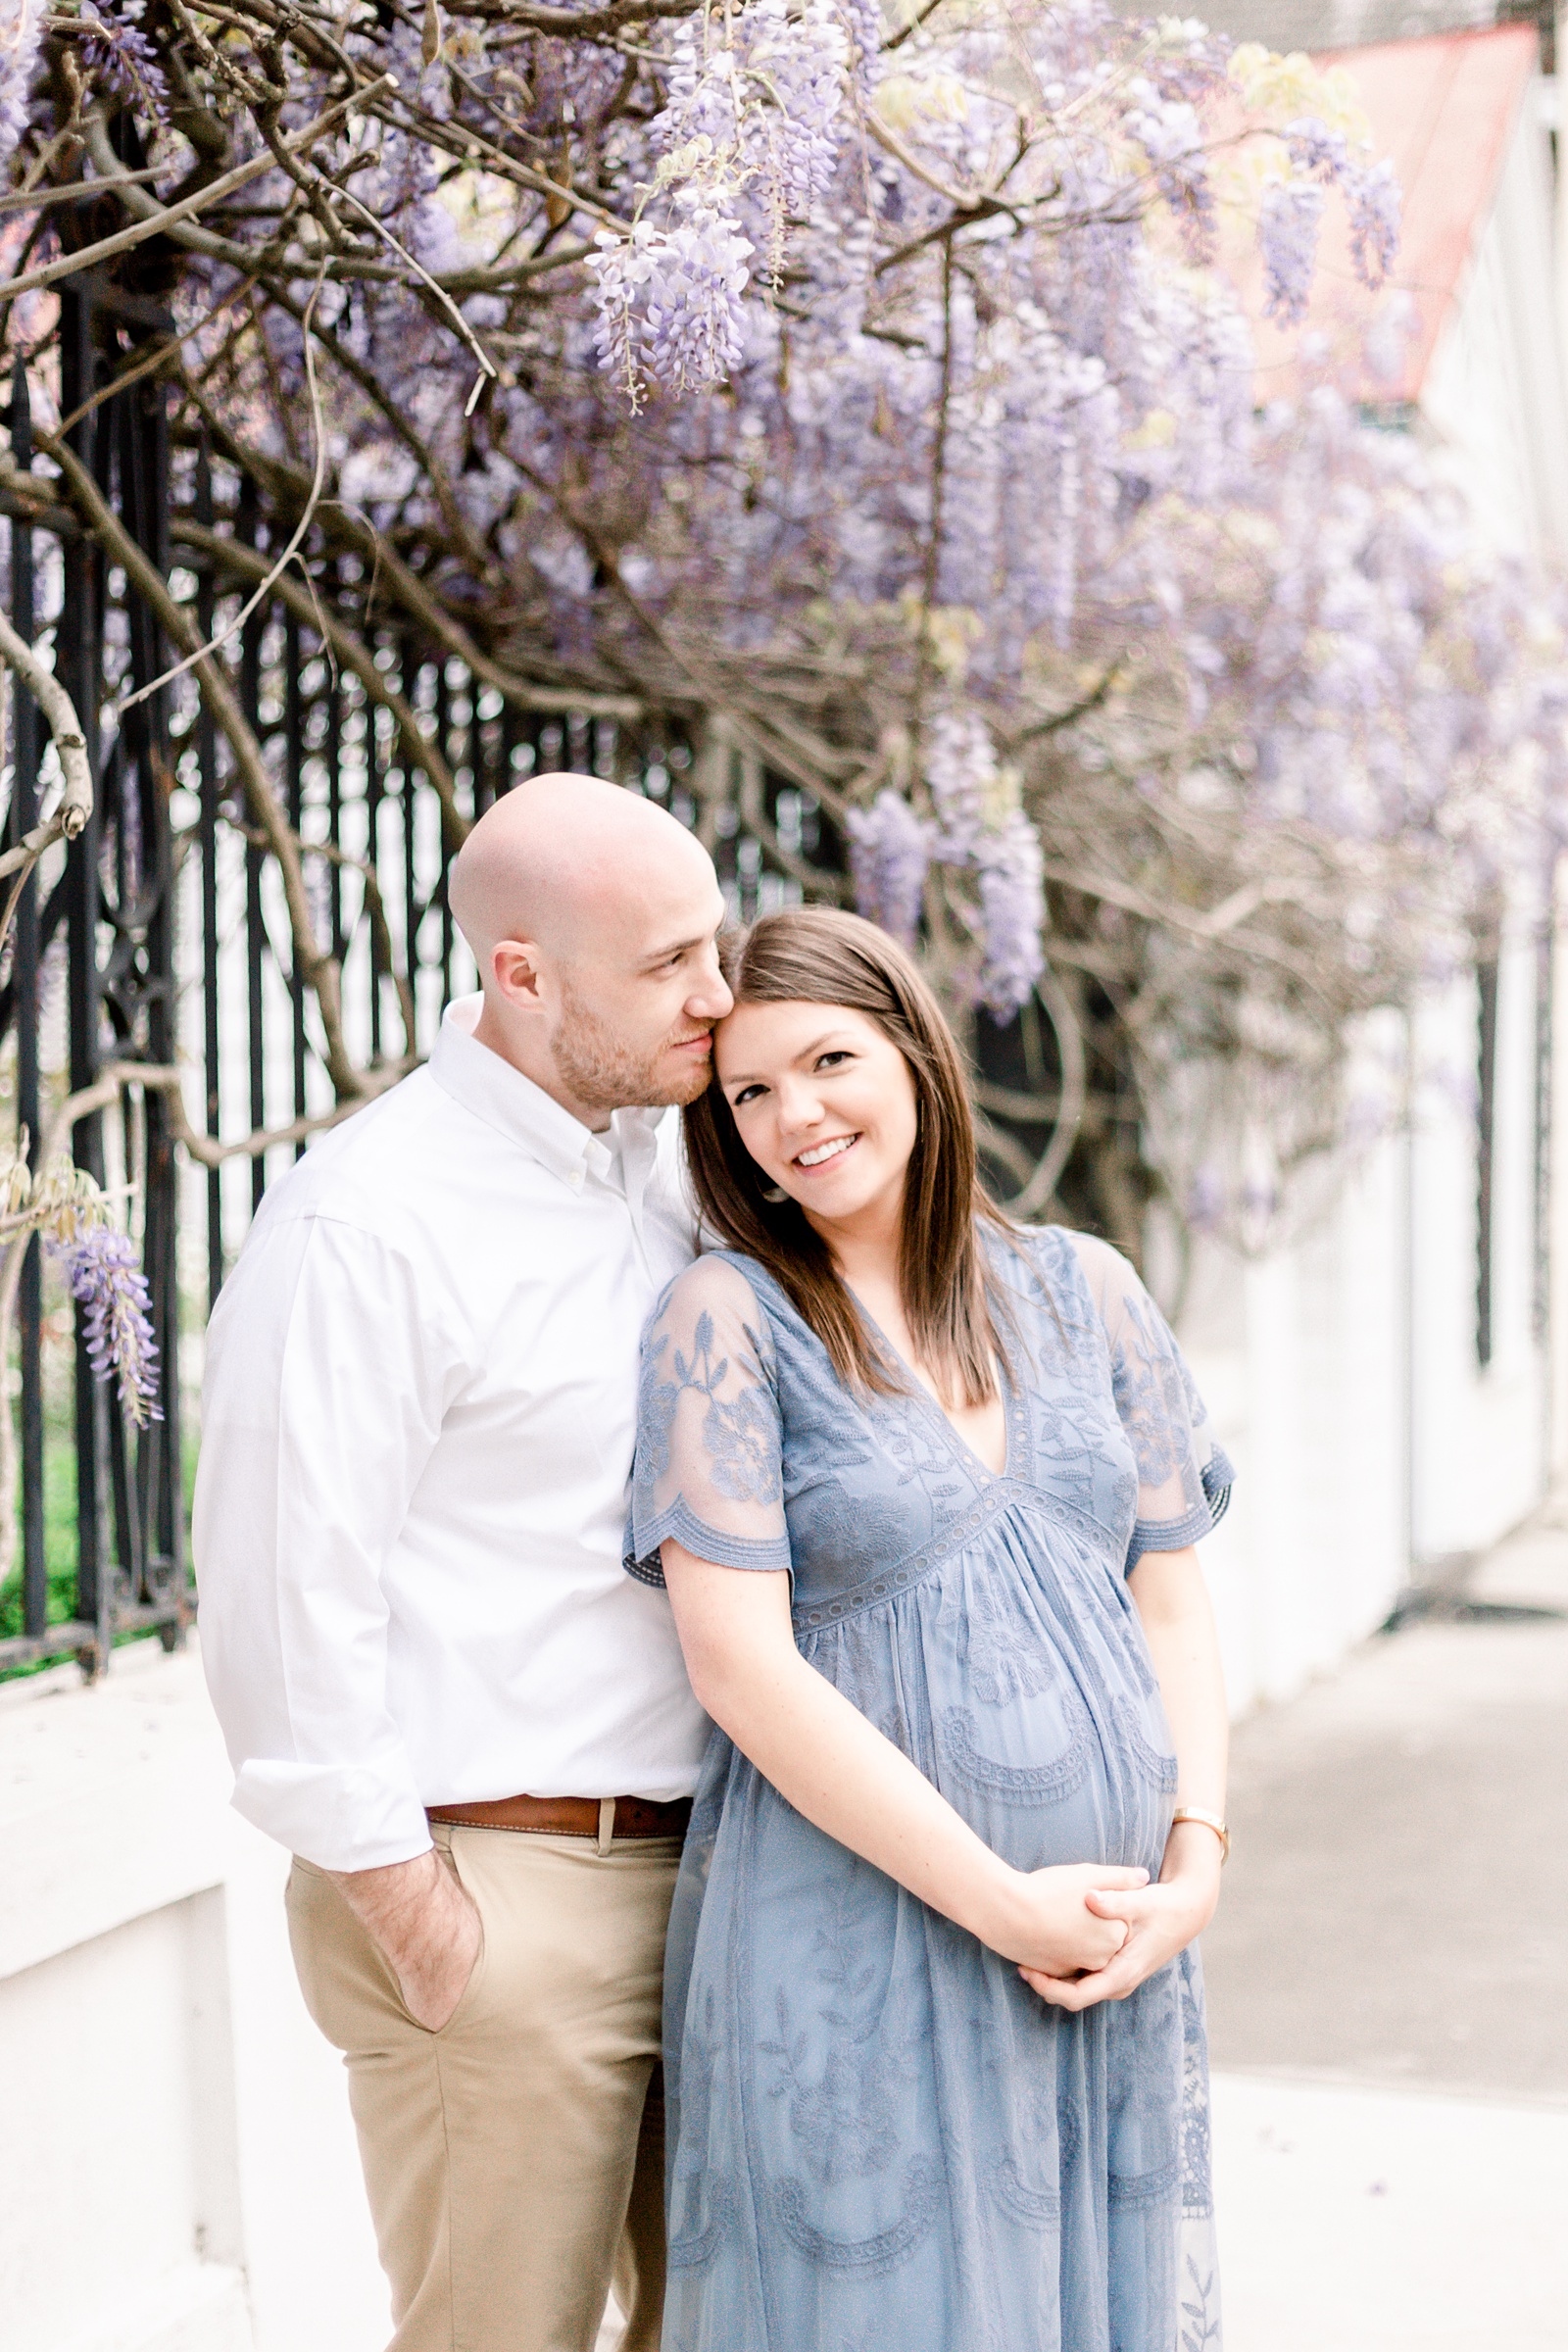 Spring maternity session among the wisteria in Charleston, SC by Charleston Maternity Photographer, Caitlyn Motycka Photography